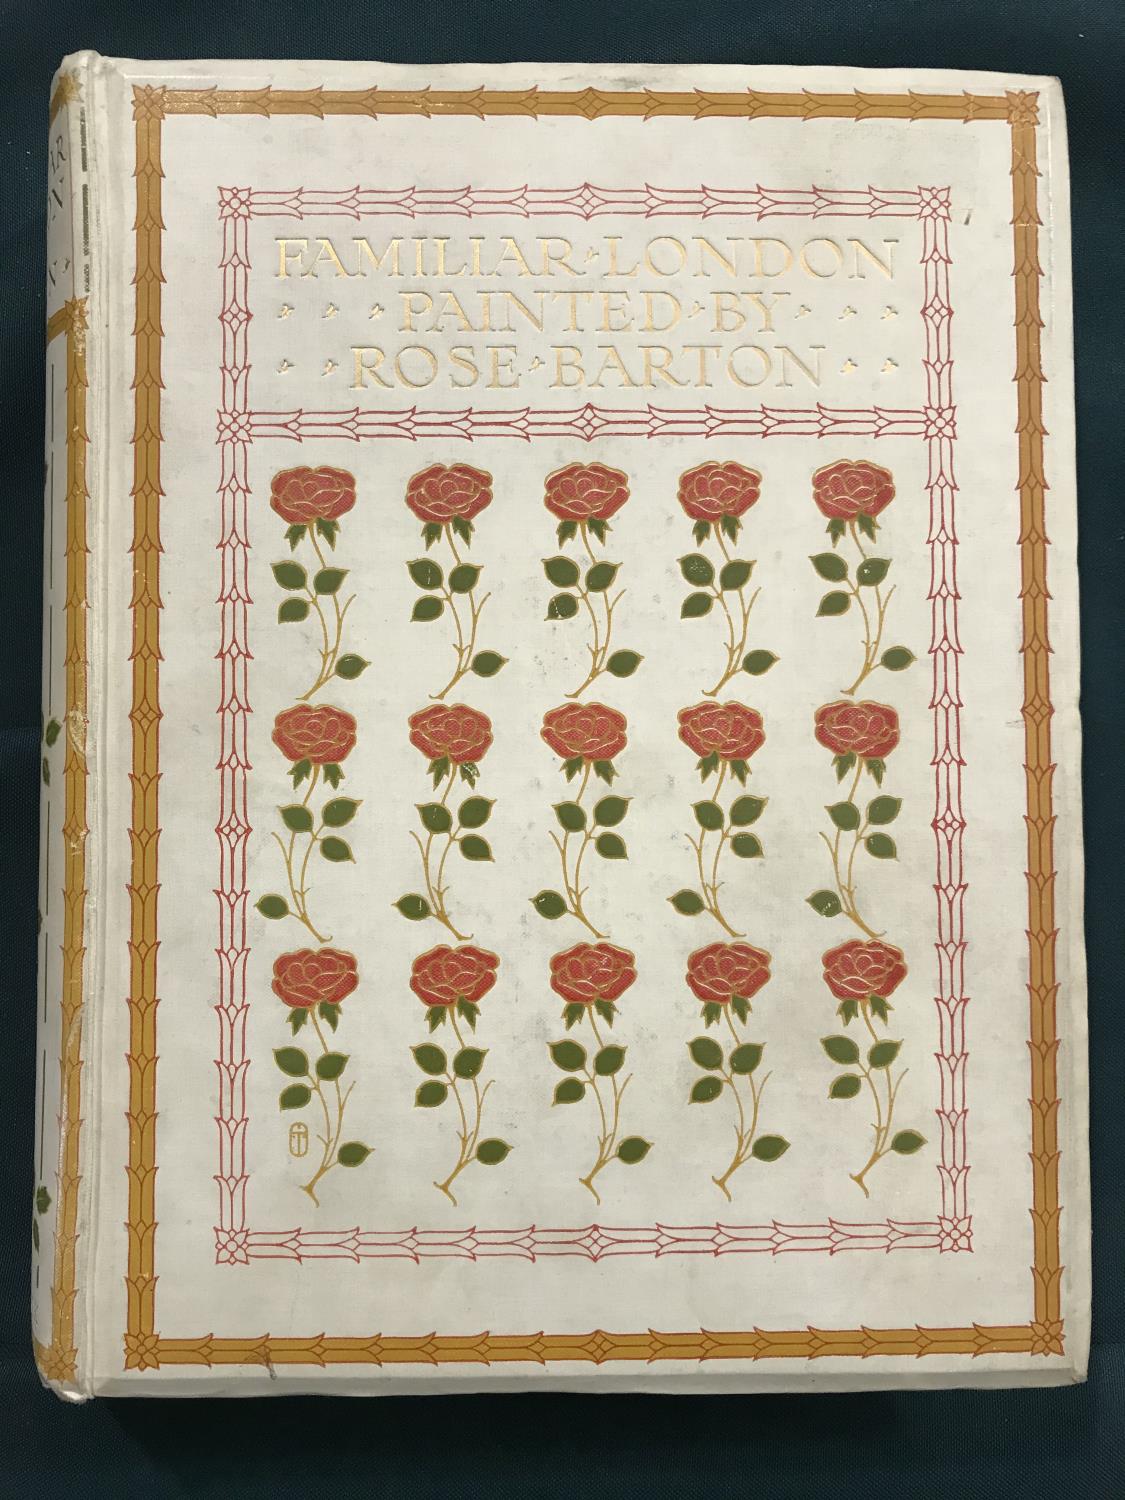 Barton, Rose. Familiar London, first edition, number 116 of 300 copies, signed by the artist, - Image 3 of 7